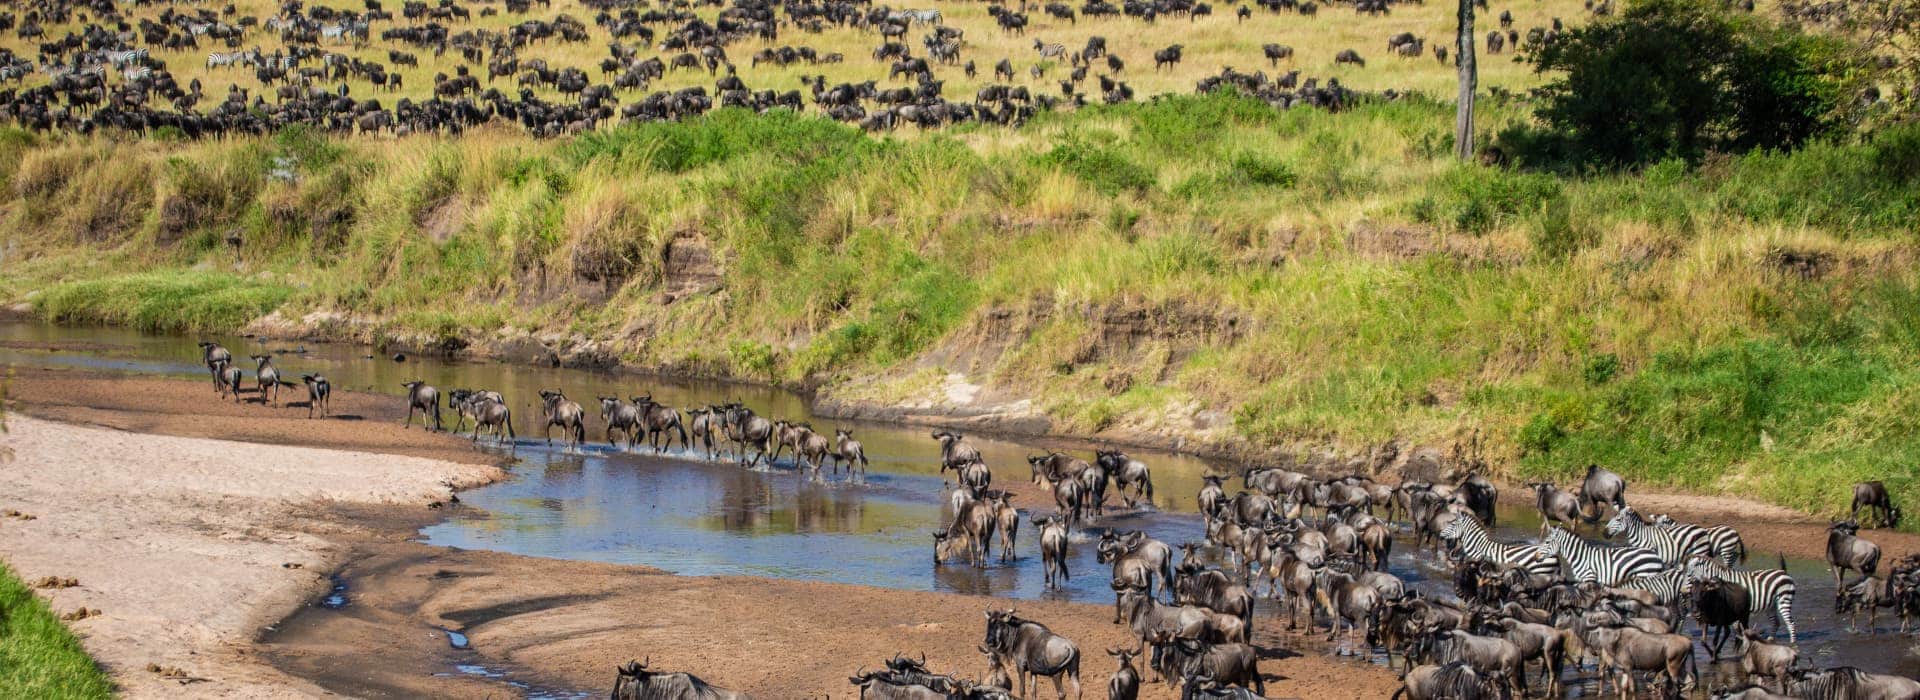 8 Days Great Migration River Crossing